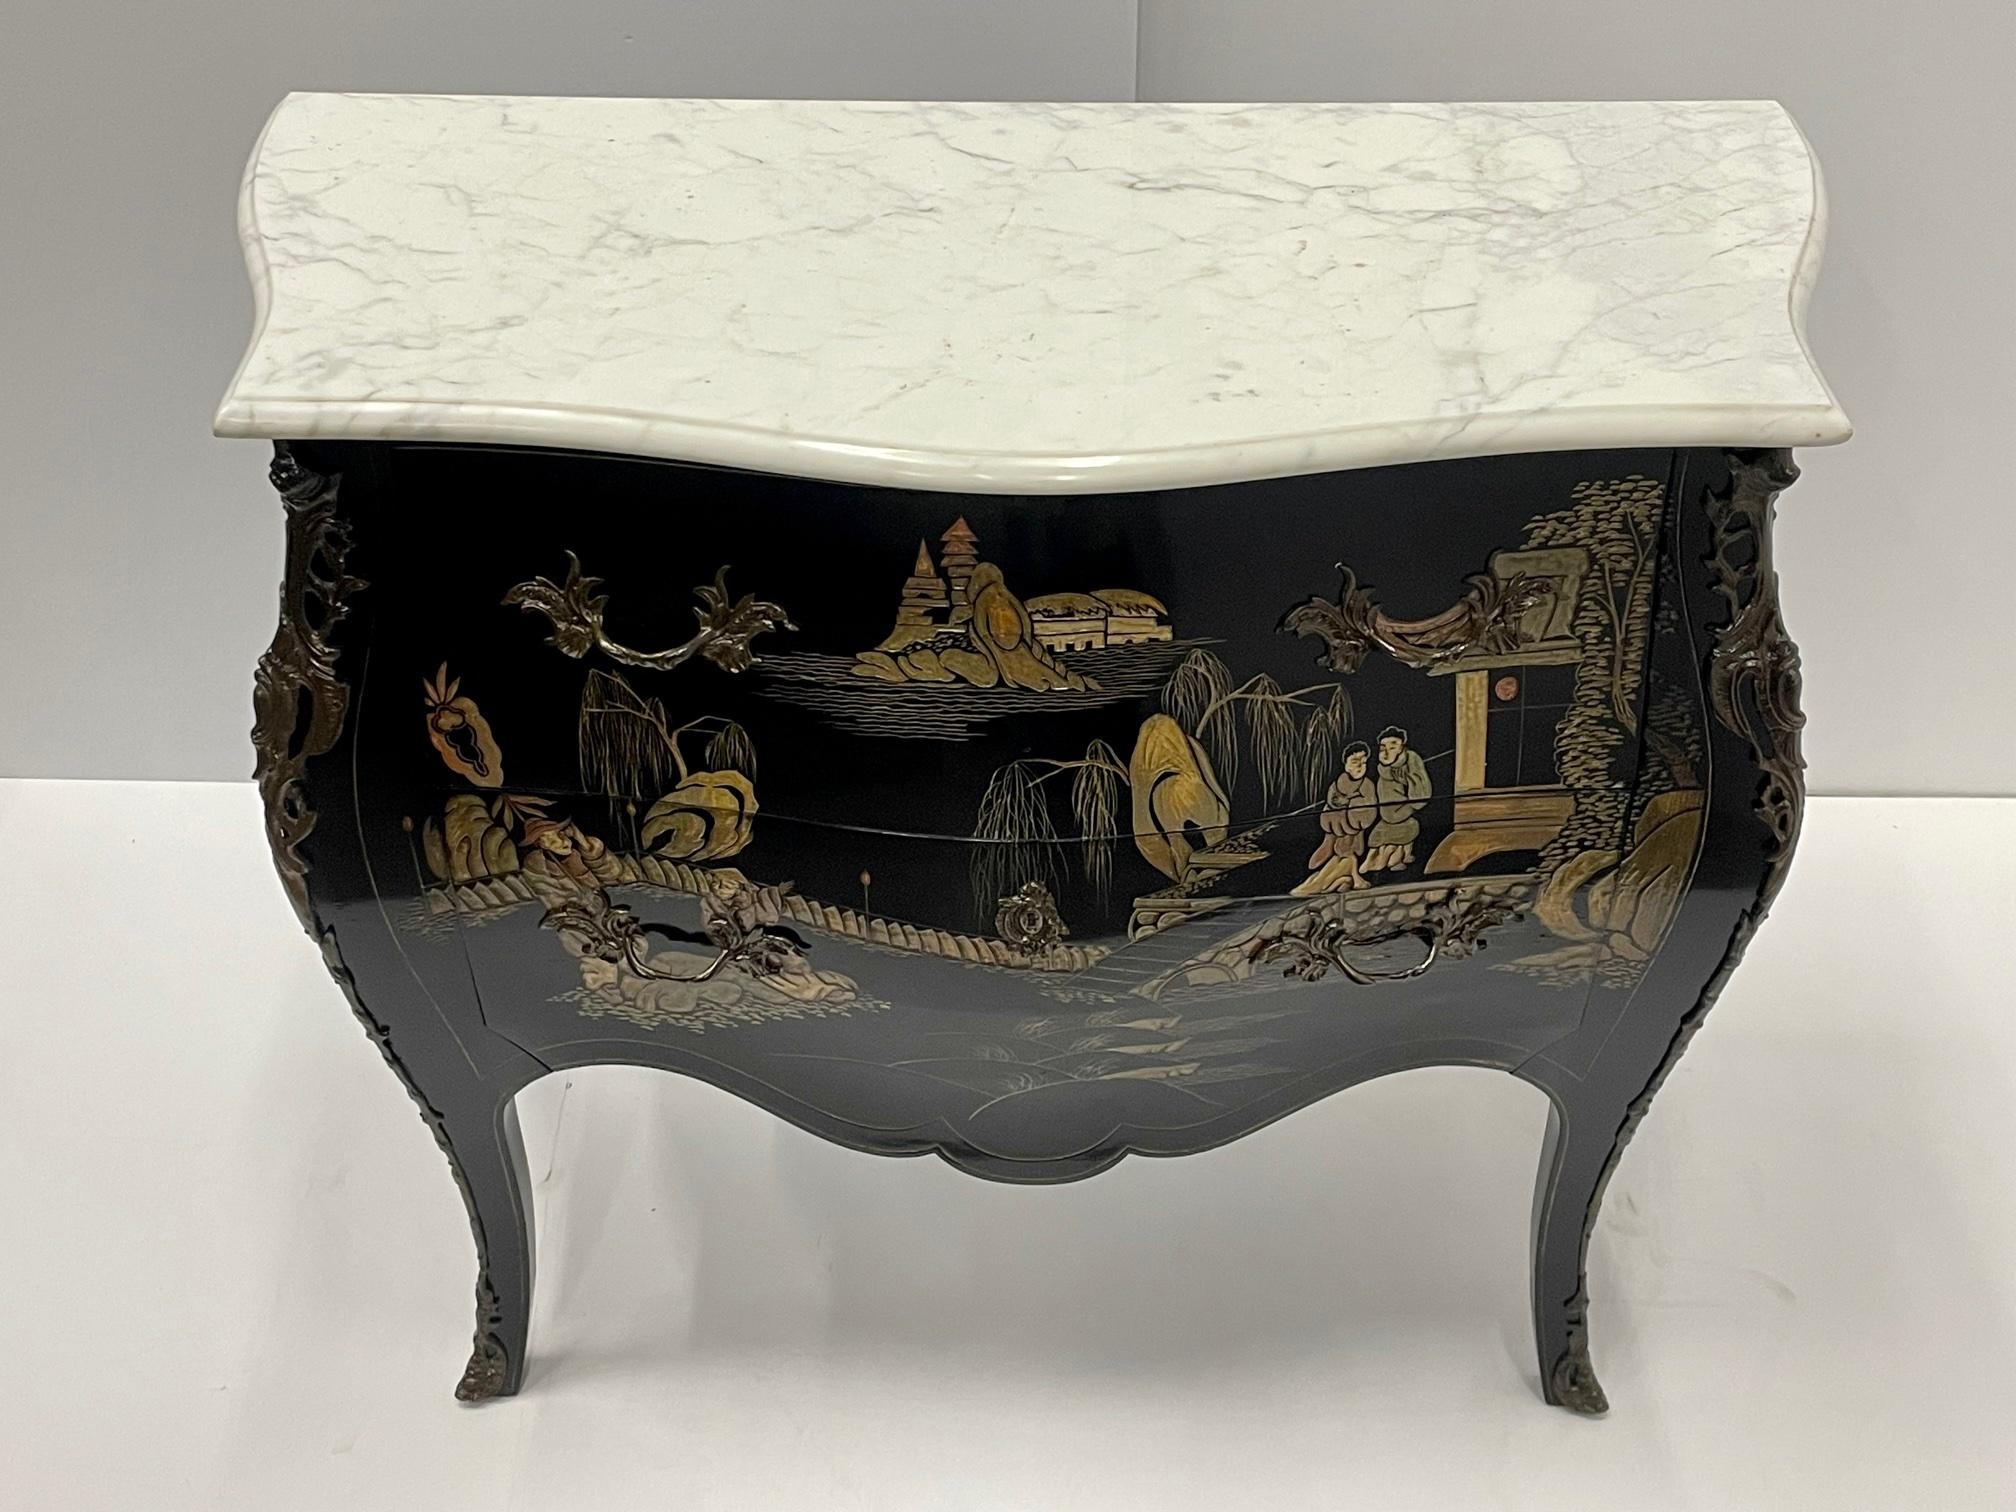 Superbly elegant Louis XV style bombay shaped French commode having black background and glamorous gold painted Chinoiserie scenes, cabriole legs, two drawers, and a contrasting white marble top. Bronze mounts.